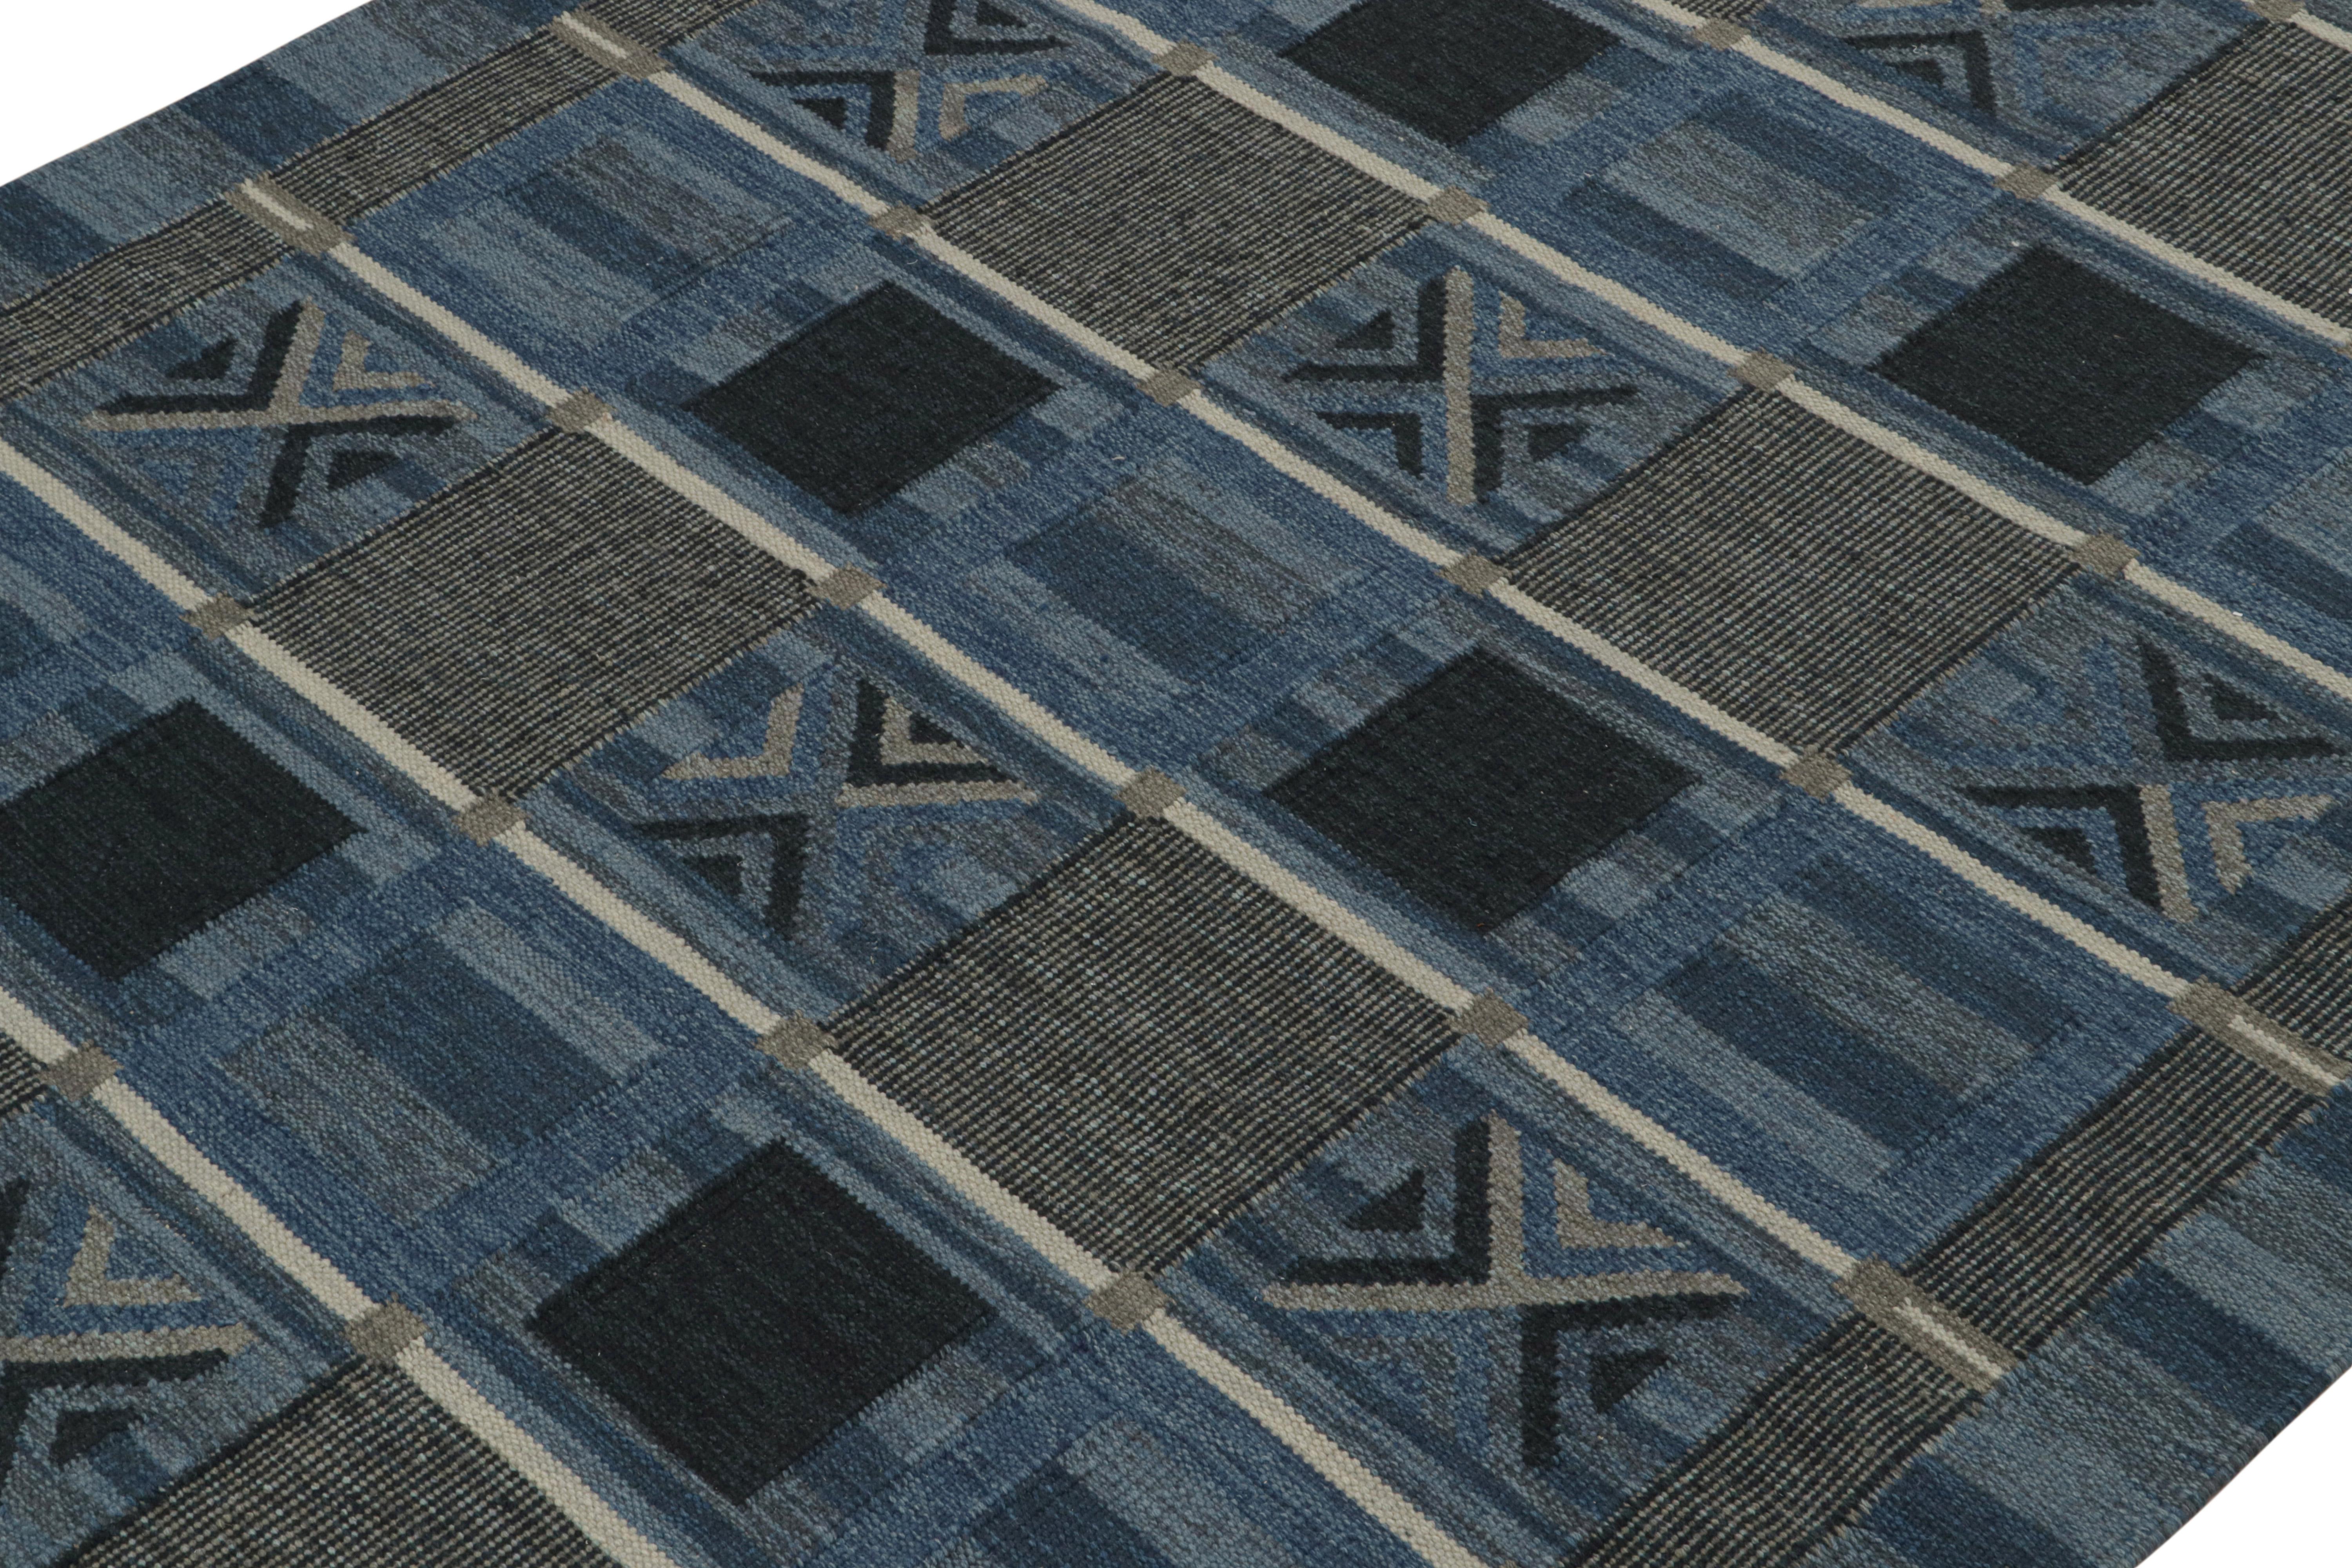 Indian Rug & Kilim’s Scandinavian Style Kilim Rug with Blue and Gray Geometric Patterns For Sale